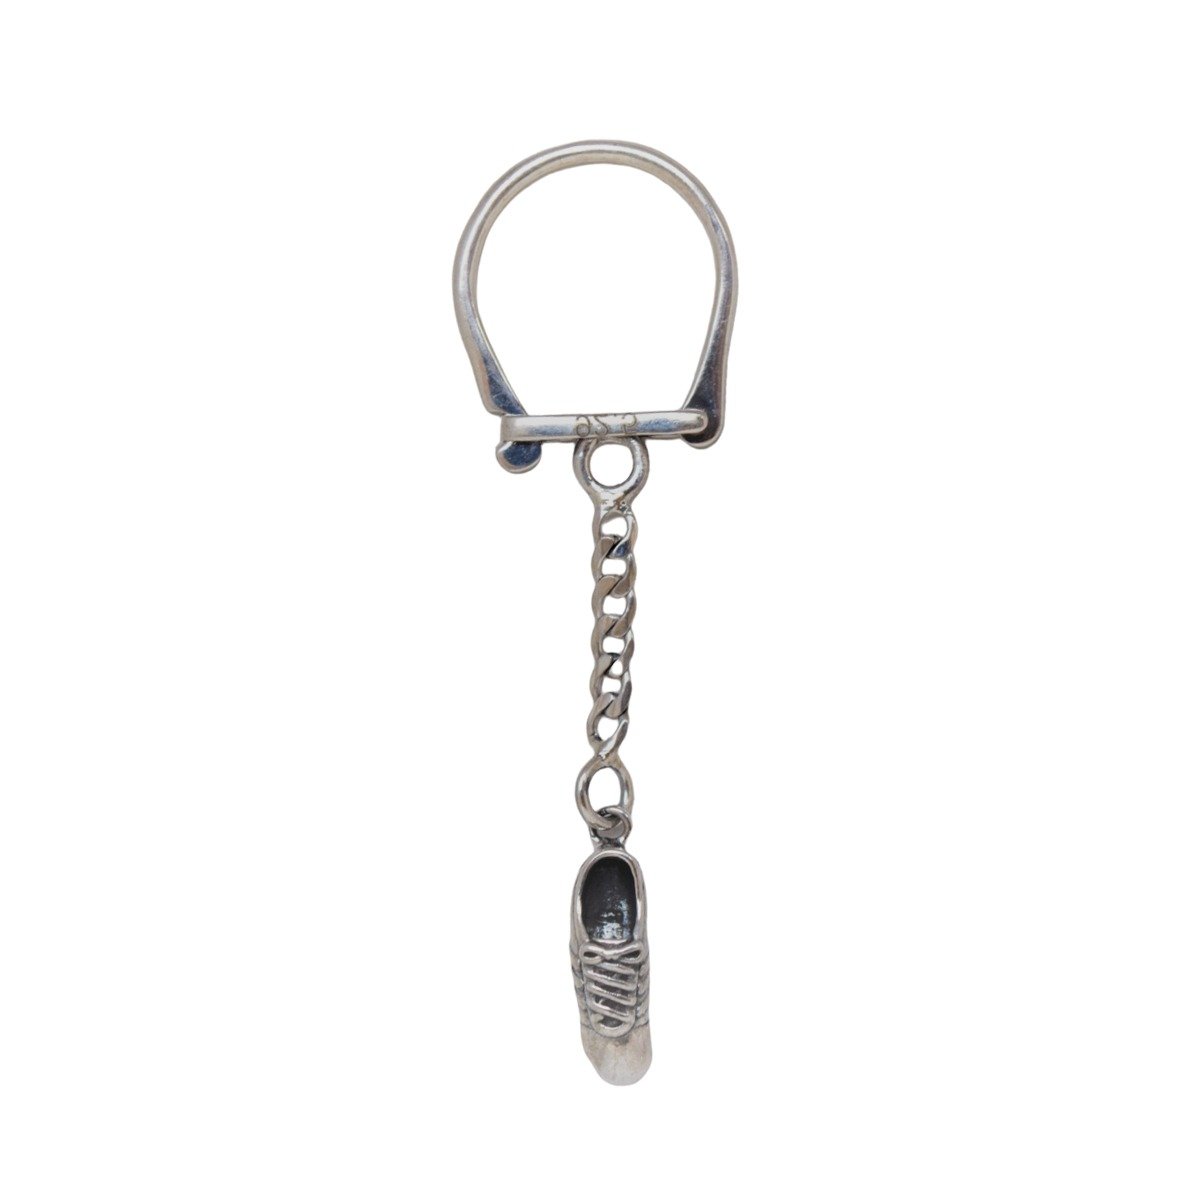 92.5 PURE FOOTBALL BOOT KEYCHAIN IN SILVER